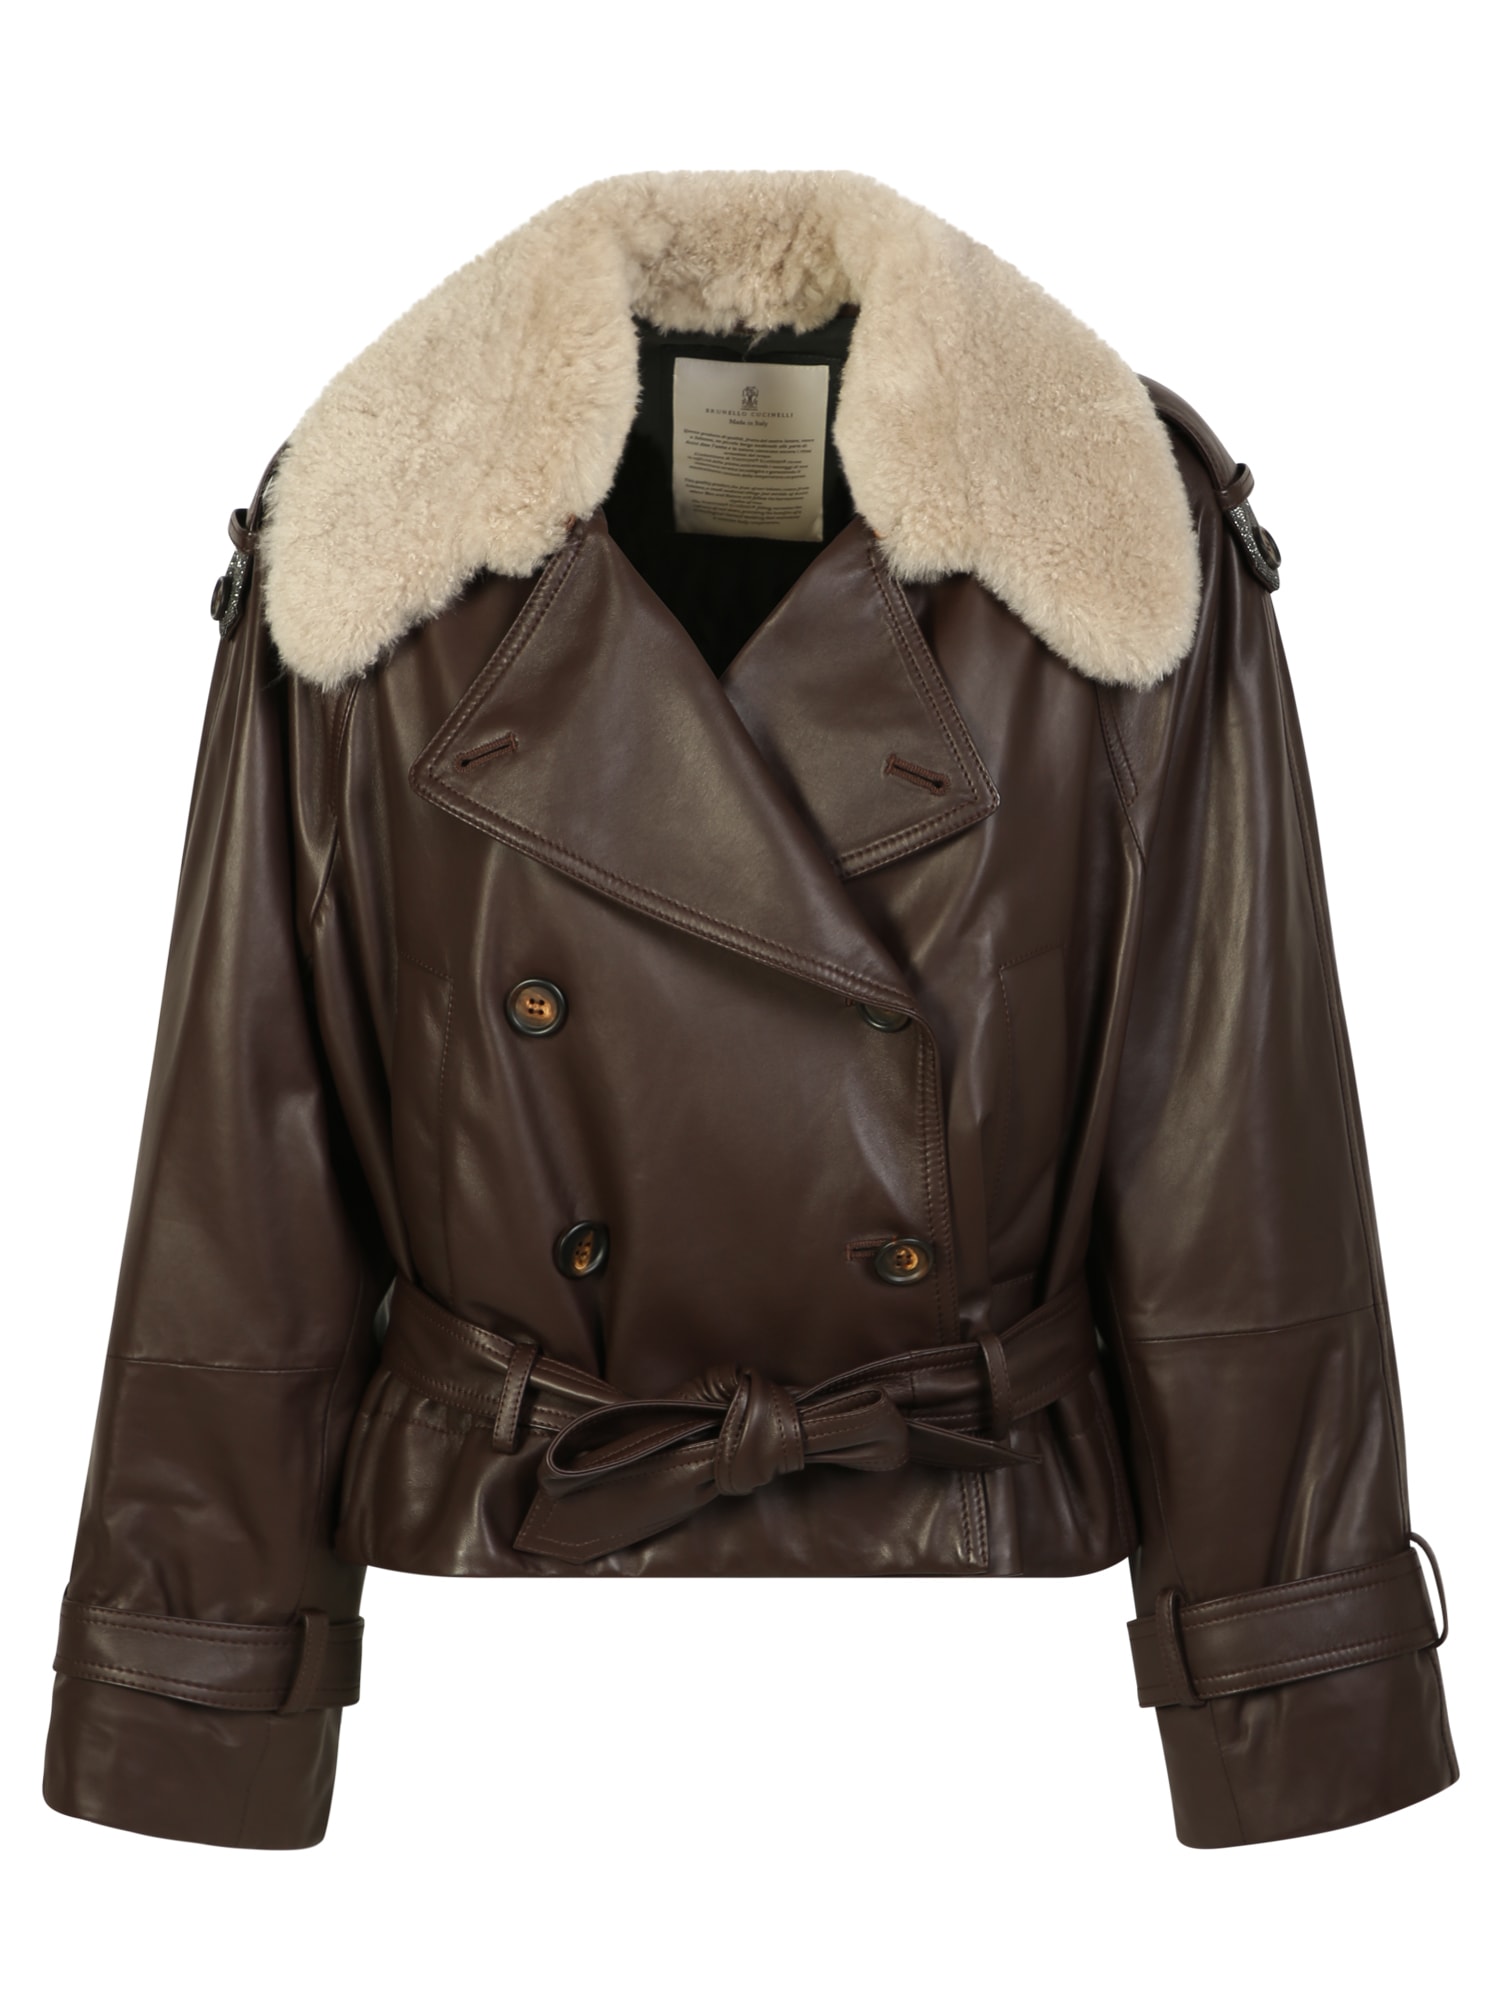 This Brunello Cucinelli Jacket Is Made Of Leather With A Shearling Collar